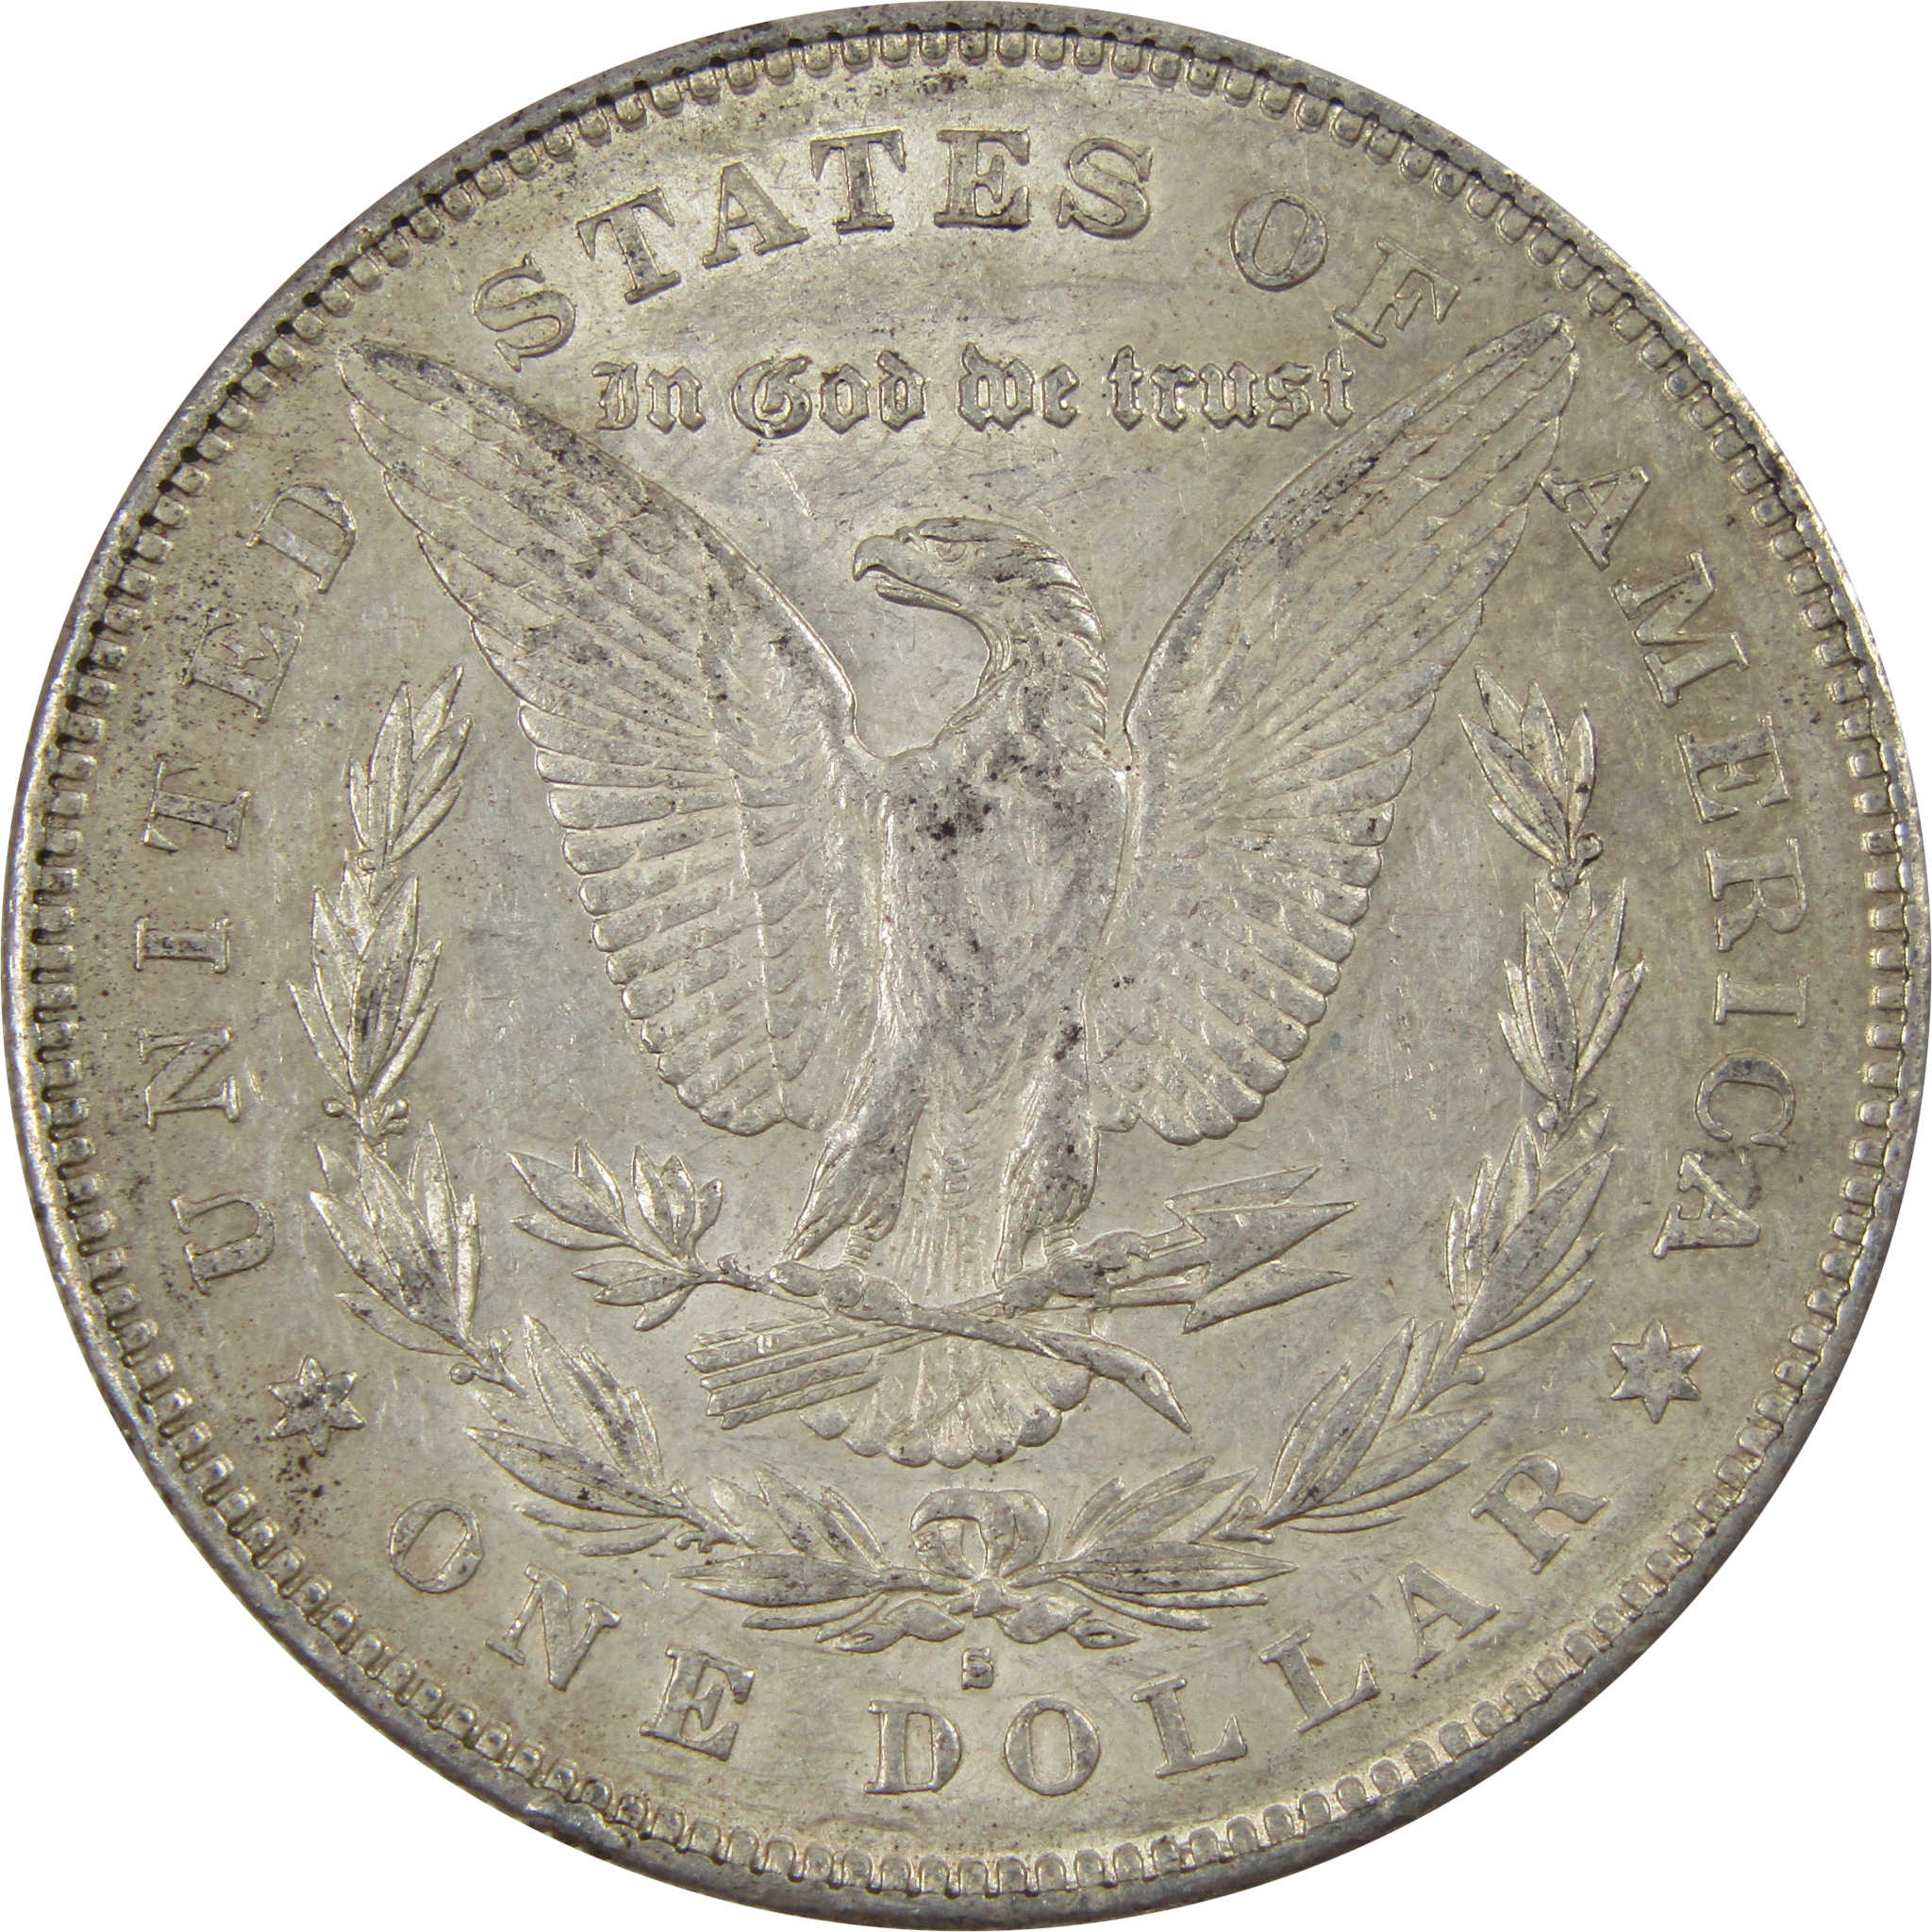 1878 S Morgan Dollar XF EF Extremely Fine 90% Silver $1 Coin SKU:I7010 - Morgan coin - Morgan silver dollar - Morgan silver dollar for sale - Profile Coins &amp; Collectibles